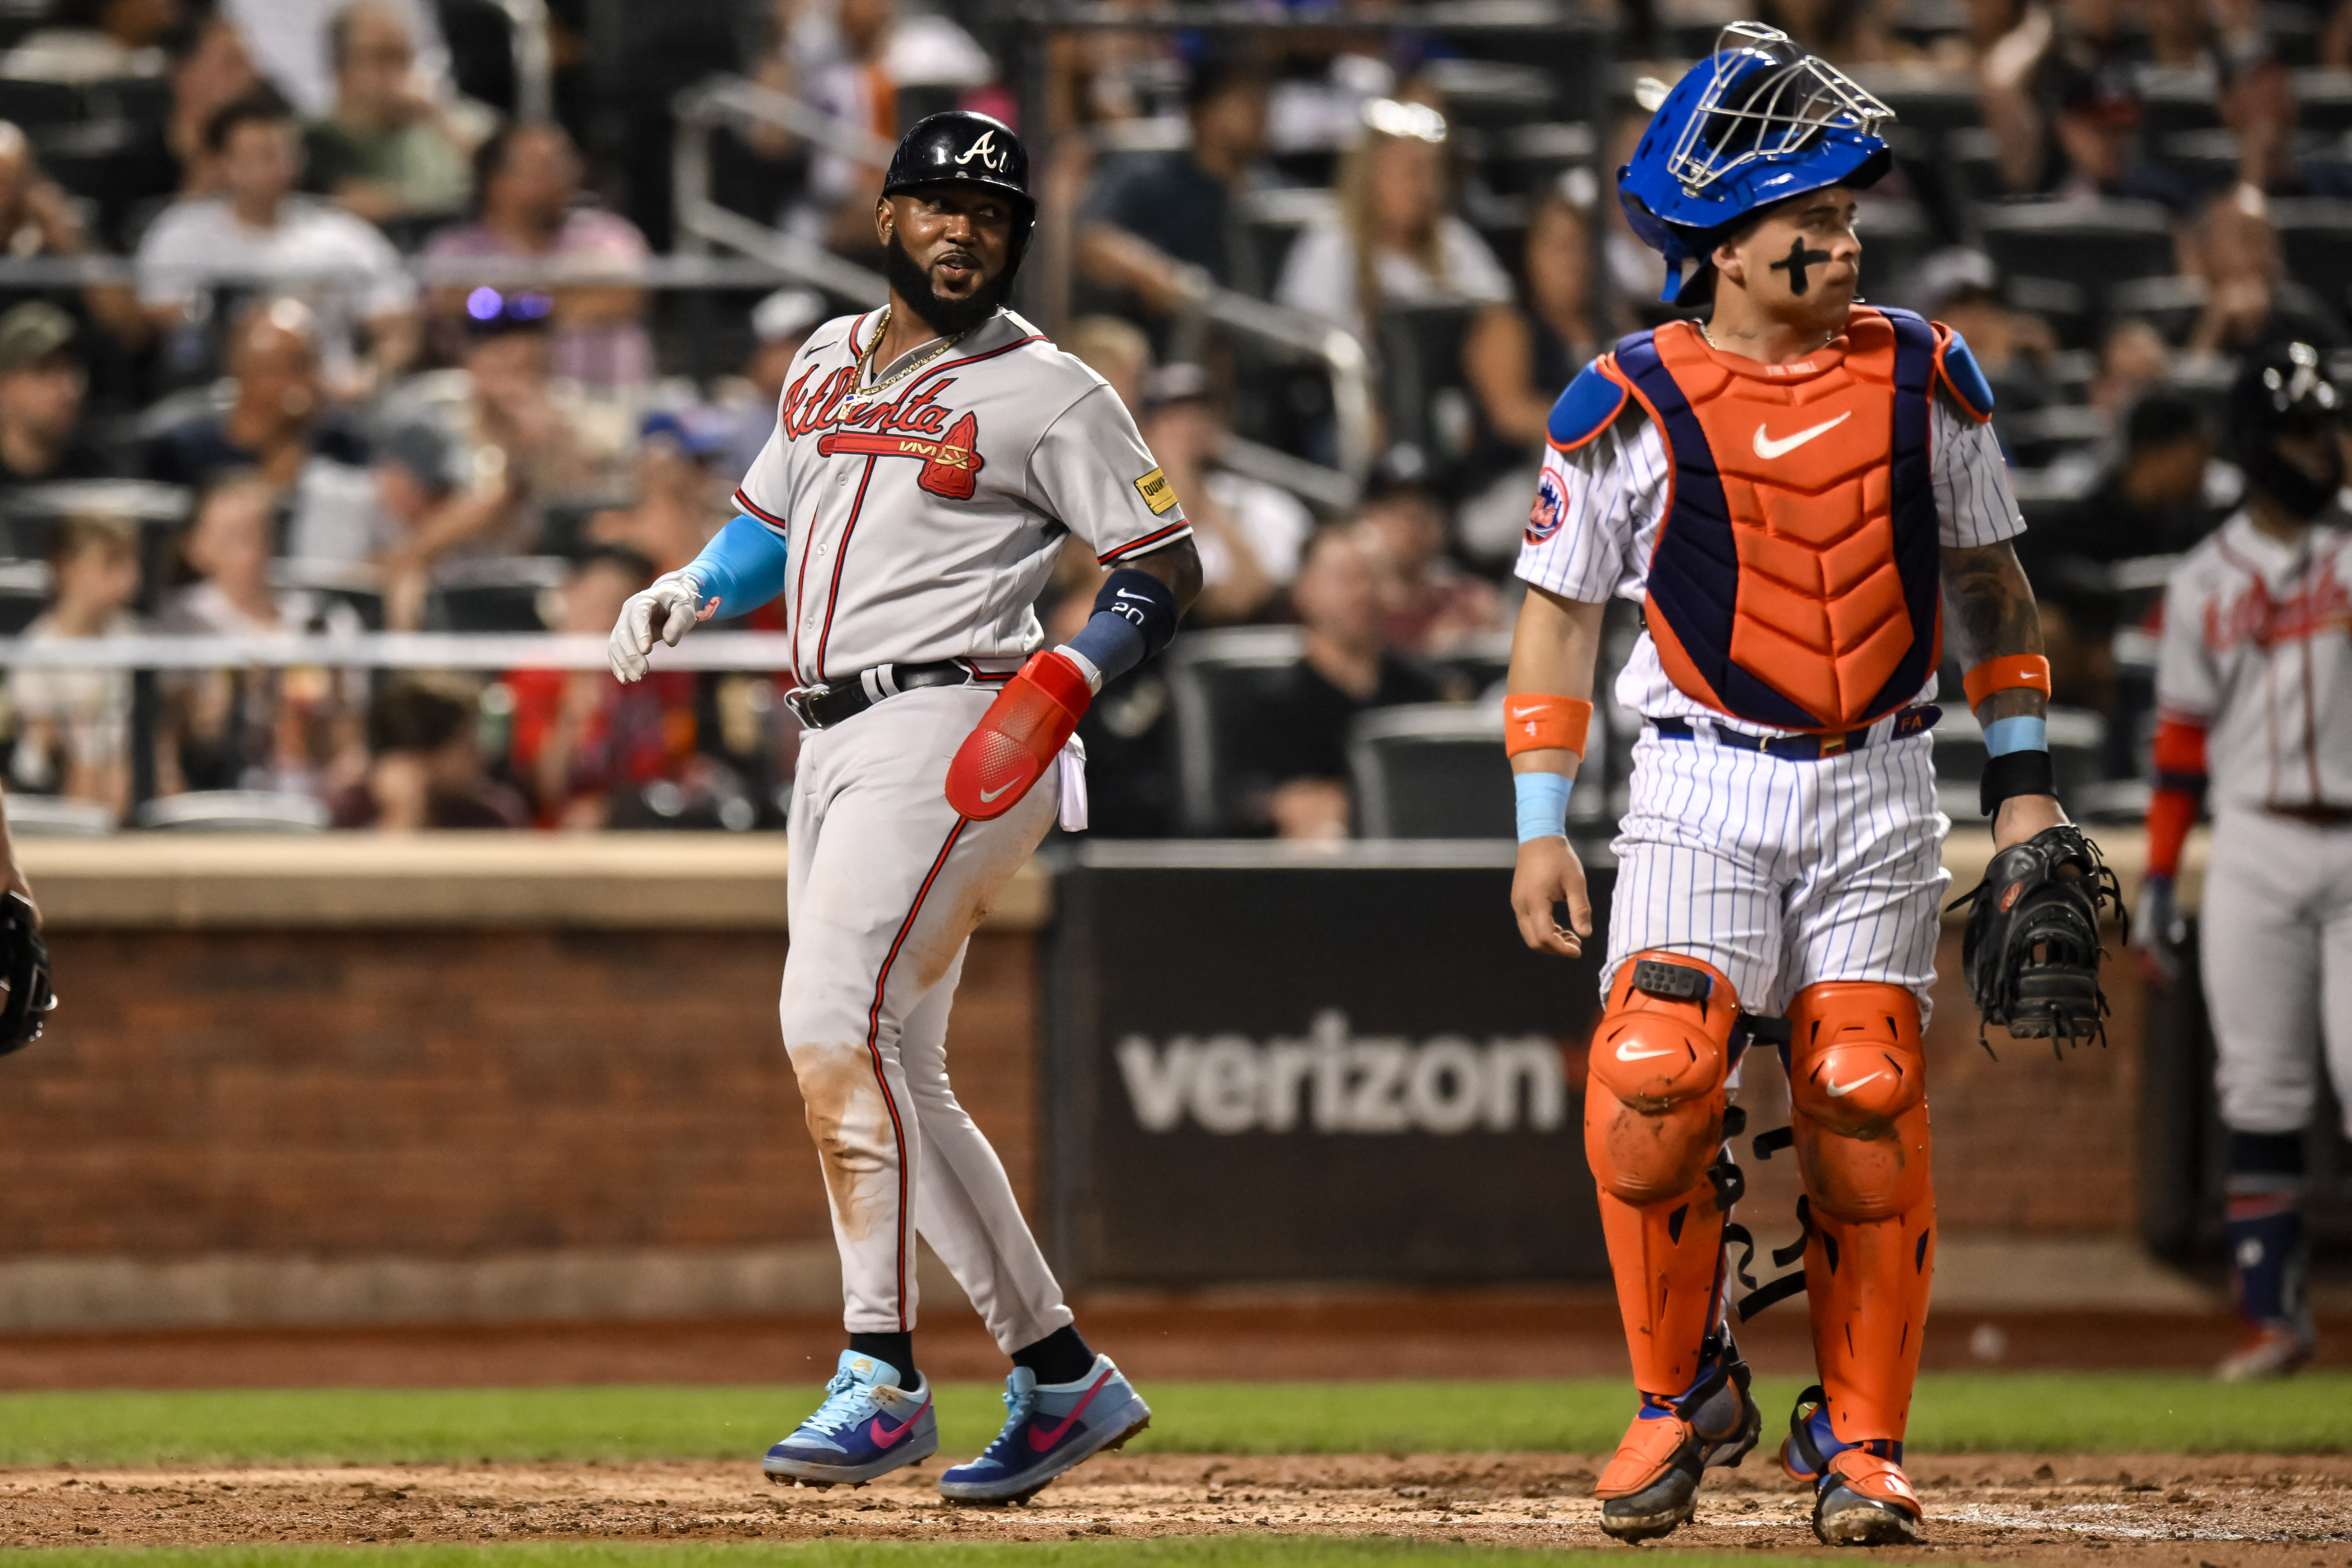 Braves sweep Mets, take 2-game lead in East with 3 remaining